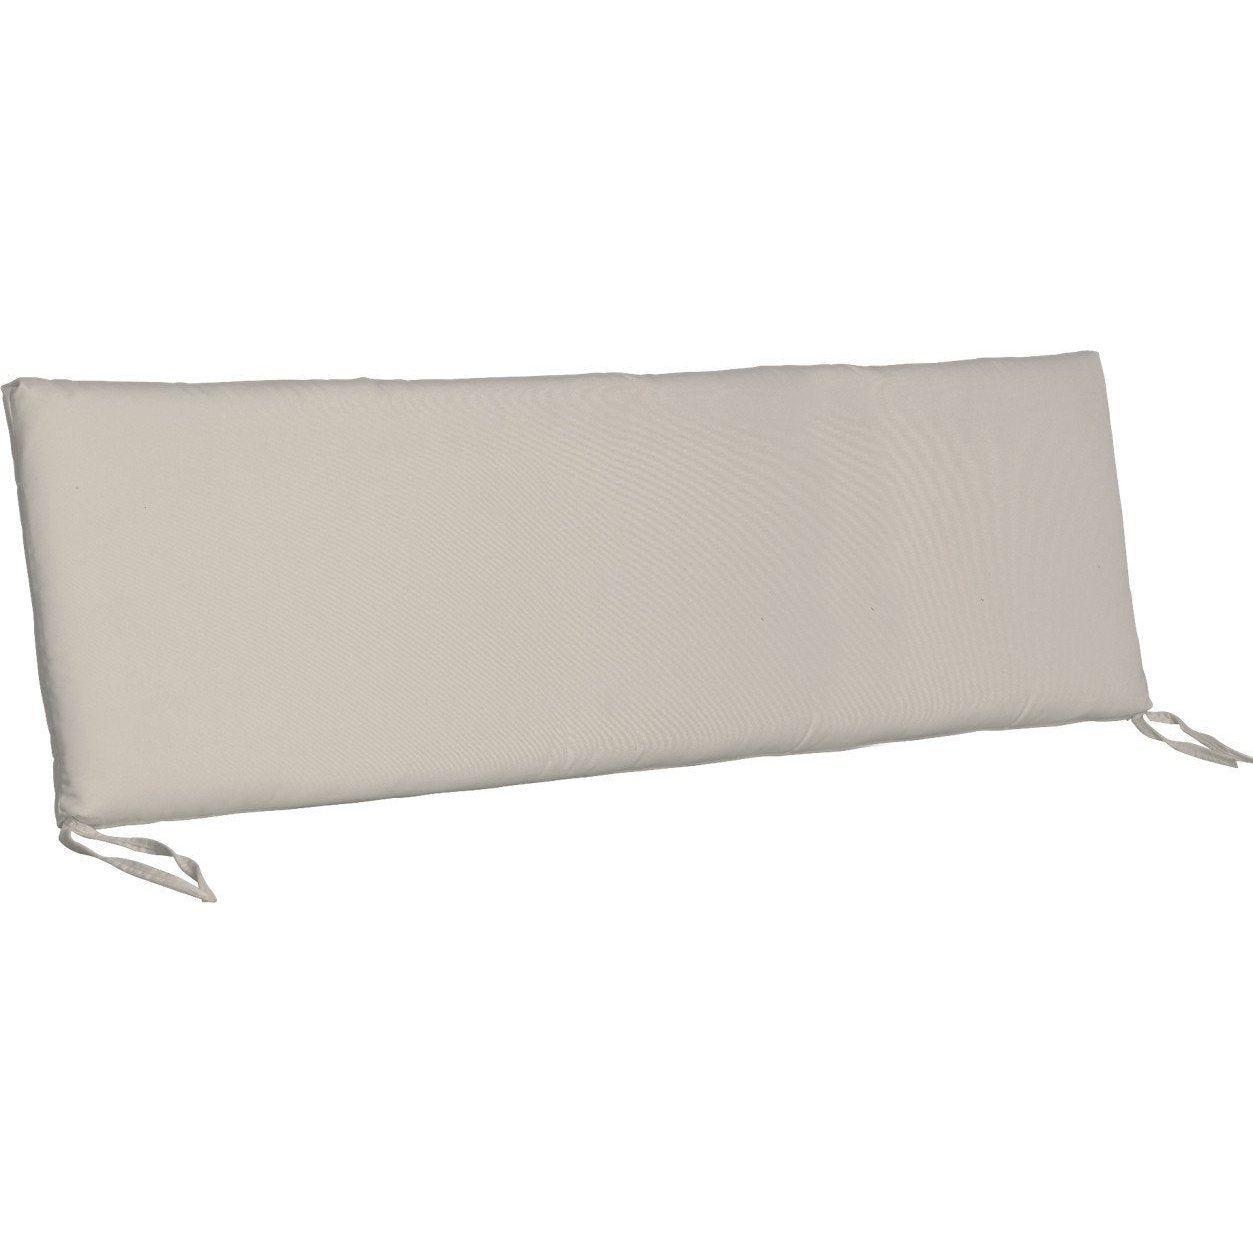 Outdoor 5' Seat Cushion Canvas